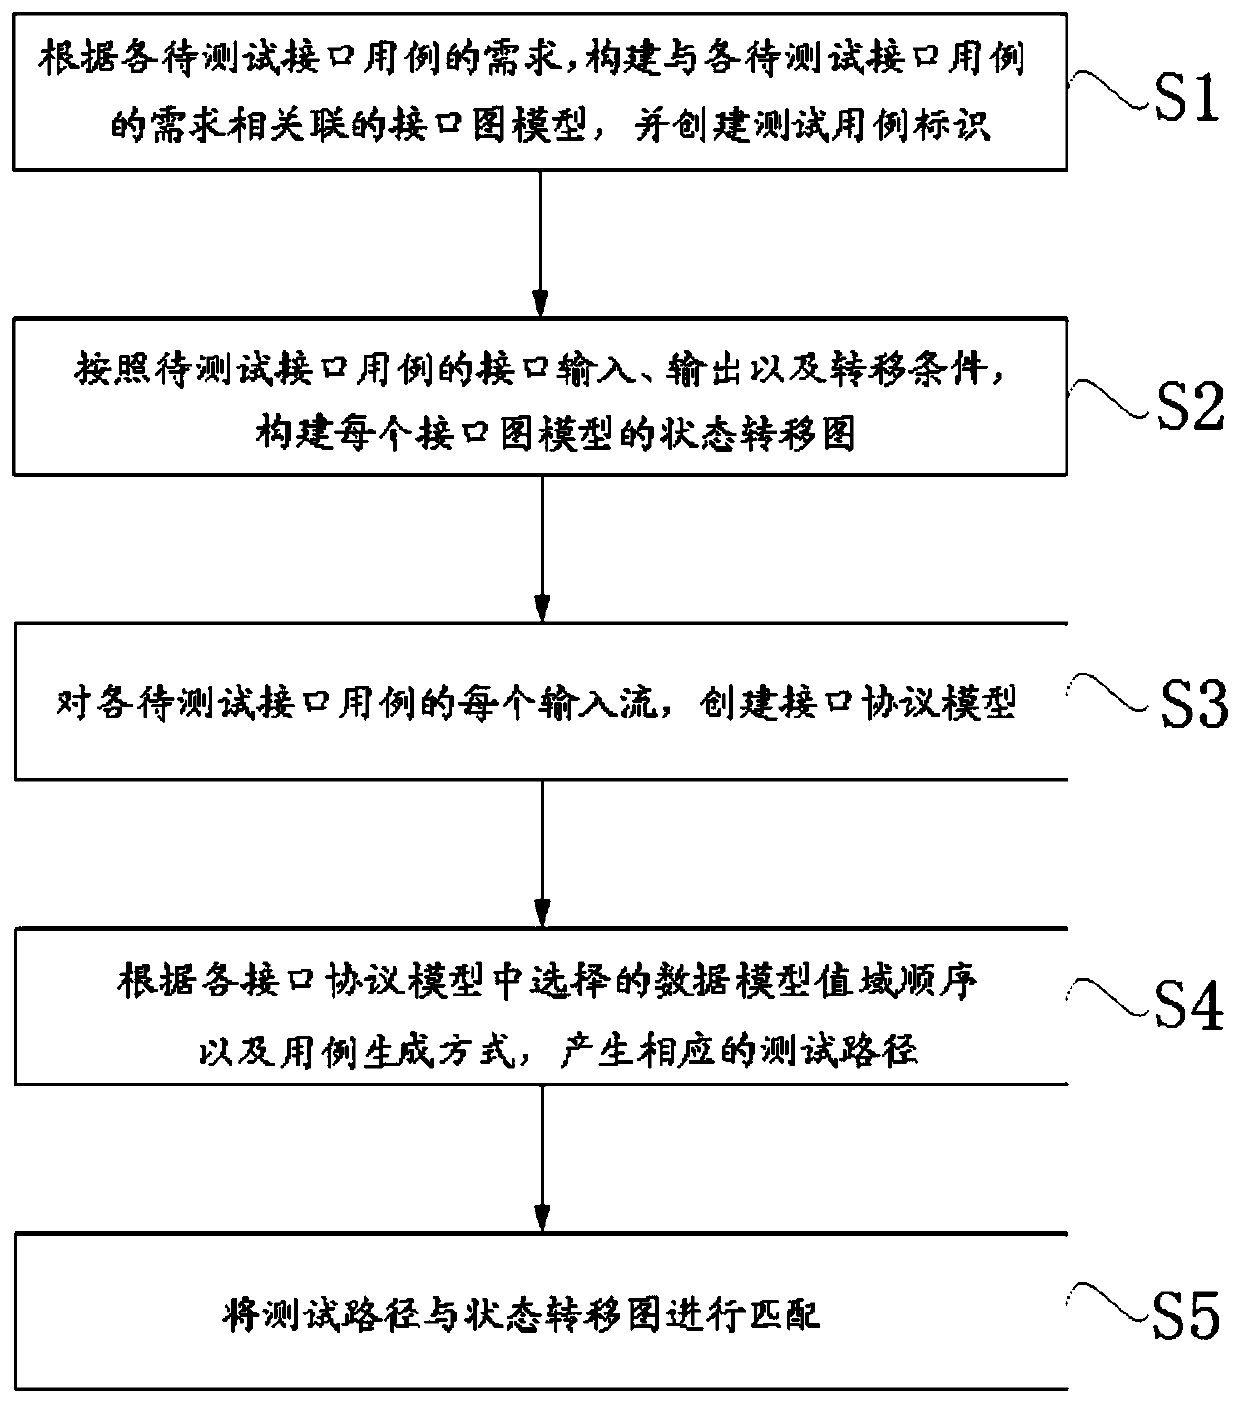 Embedded software interface case automatic generation method